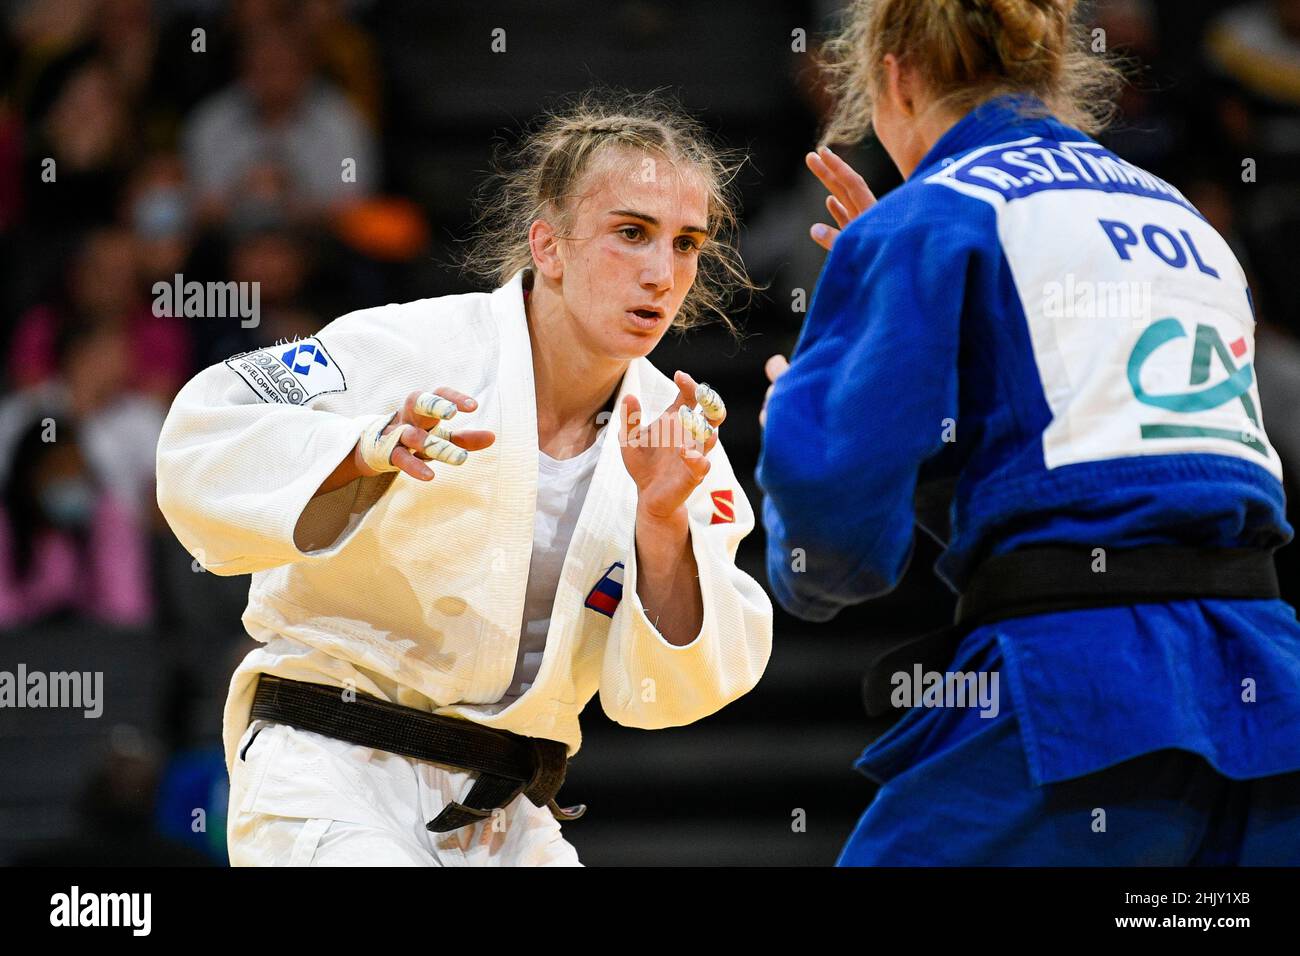 Women -63 kg, Ekaterina VALKOVA of Russia competes during the Paris Grand Slam 2021, Judo event on October 16, 2021 at AccorHotels Arena in Paris, Fra Stock Photo